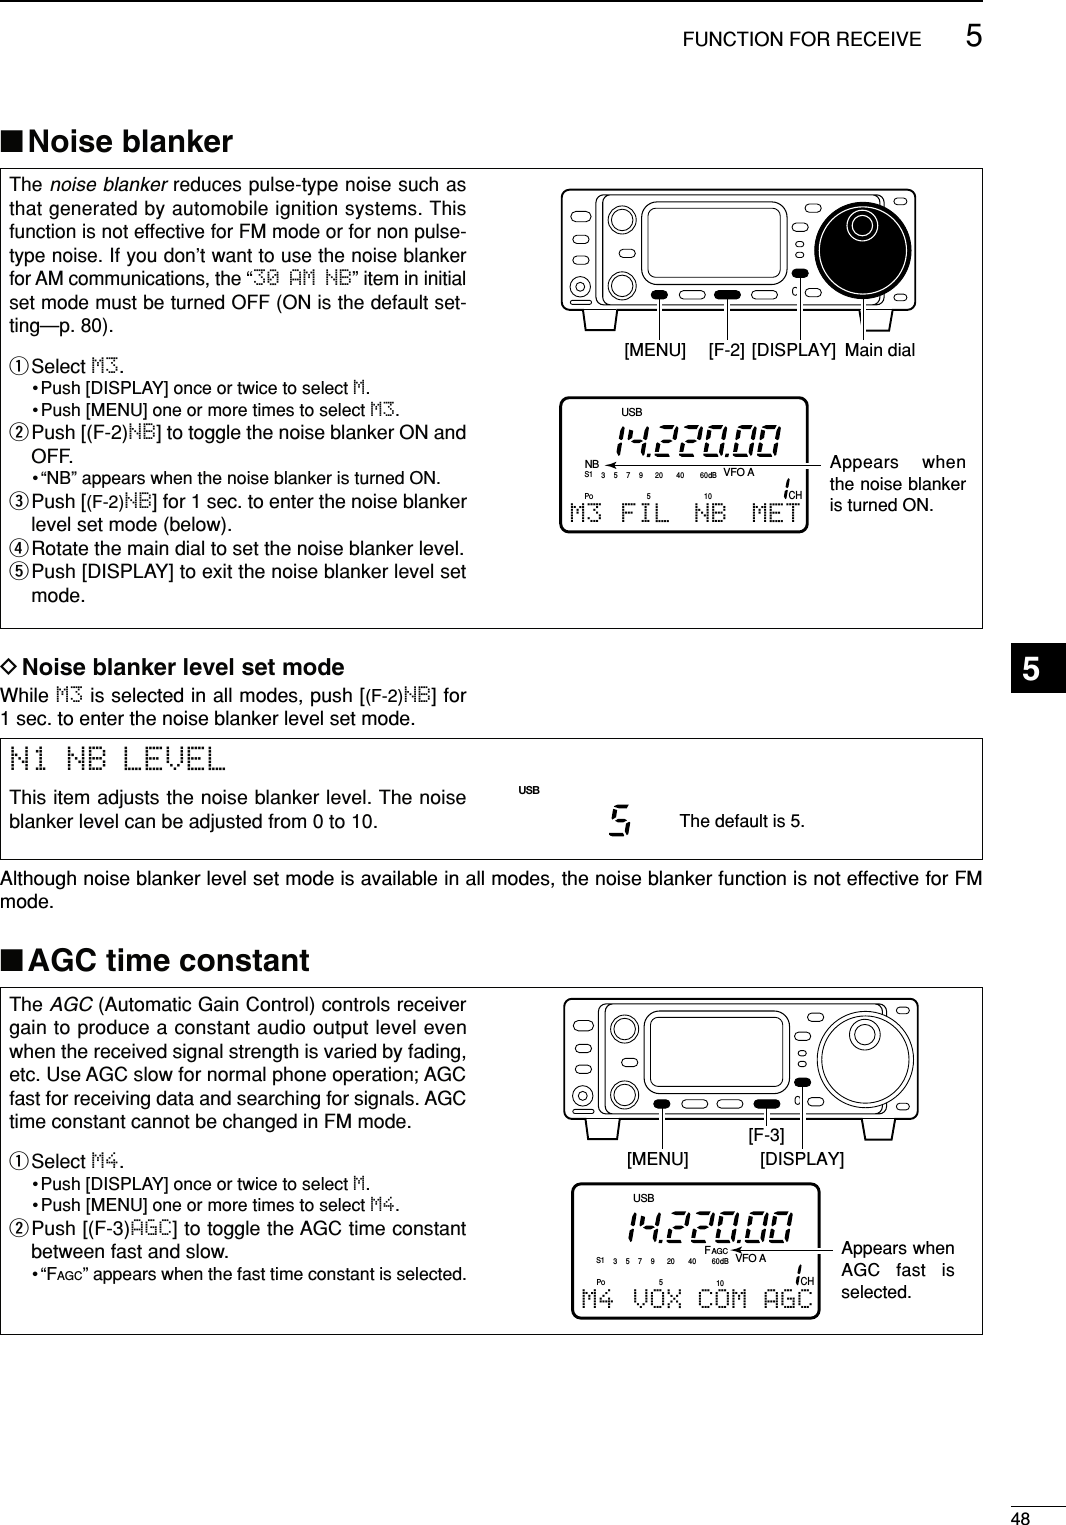 485FUNCTION FOR RECEIVE■Noise blanker■AGC time constantThe noise blanker reduces pulse-type noise such asthat generated by automobile ignition systems. Thisfunction is not effective for FM mode or for non pulse-type noise. If you don’t want to use the noise blankerfor AM communications, the “30 AM NB” item in initialset mode must be turned OFF (ON is the default set-ting—p. 80).qSelect M3.•Push [DISPLAY] once or twice to select M.• Push [MENU] one or more times to select M3.wPush [(F-2)NB] to toggle the noise blanker ON andOFF.• “NB” appears when the noise blanker is turned ON.ePush [(F-2)NB] for 1 sec. to enter the noise blankerlevel set mode (below).rRotate the main dial to set the noise blanker level.tPush [DISPLAY] to exit the noise blanker level setmode.NBCHVFO AS1 5379204060dBUSBM3 FIL NB METPO510Appears when the noise blanker is turned ON.Main dial[DISPLAY][MENU] [F-2]The AGC (Automatic Gain Control) controls receivergain to produce a constant audio output level evenwhen the received signal strength is varied by fading,etc. Use AGC slow for normal phone operation; AGCfast for receiving data and searching for signals. AGCtime constant cannot be changed in FM mode.qSelect M4.•Push [DISPLAY] once or twice to select M.• Push [MENU] one or more times to select M4.wPush [(F-3)AGC] to toggle the AGC time constantbetween fast and slow.•“FAGC” appears when the fast time constant is selected.CHVFO AS1 5379204060dBUSBM4 VOX COM AGCFAGCPO510Appears when AGC fast is selected.[DISPLAY][MENU][F-3]N1 NB LEVELThis item adjusts the noise blanker level. The noiseblanker level can be adjusted from 0 to 10.The default is 5.USBAlthough noise blanker level set mode is available in all modes, the noise blanker function is not effective for FMmode.While M3 is selected in all modes, push [(F-2)NB] for 1 sec. to enter the noise blanker level set mode.DNoise blanker level set mode 5